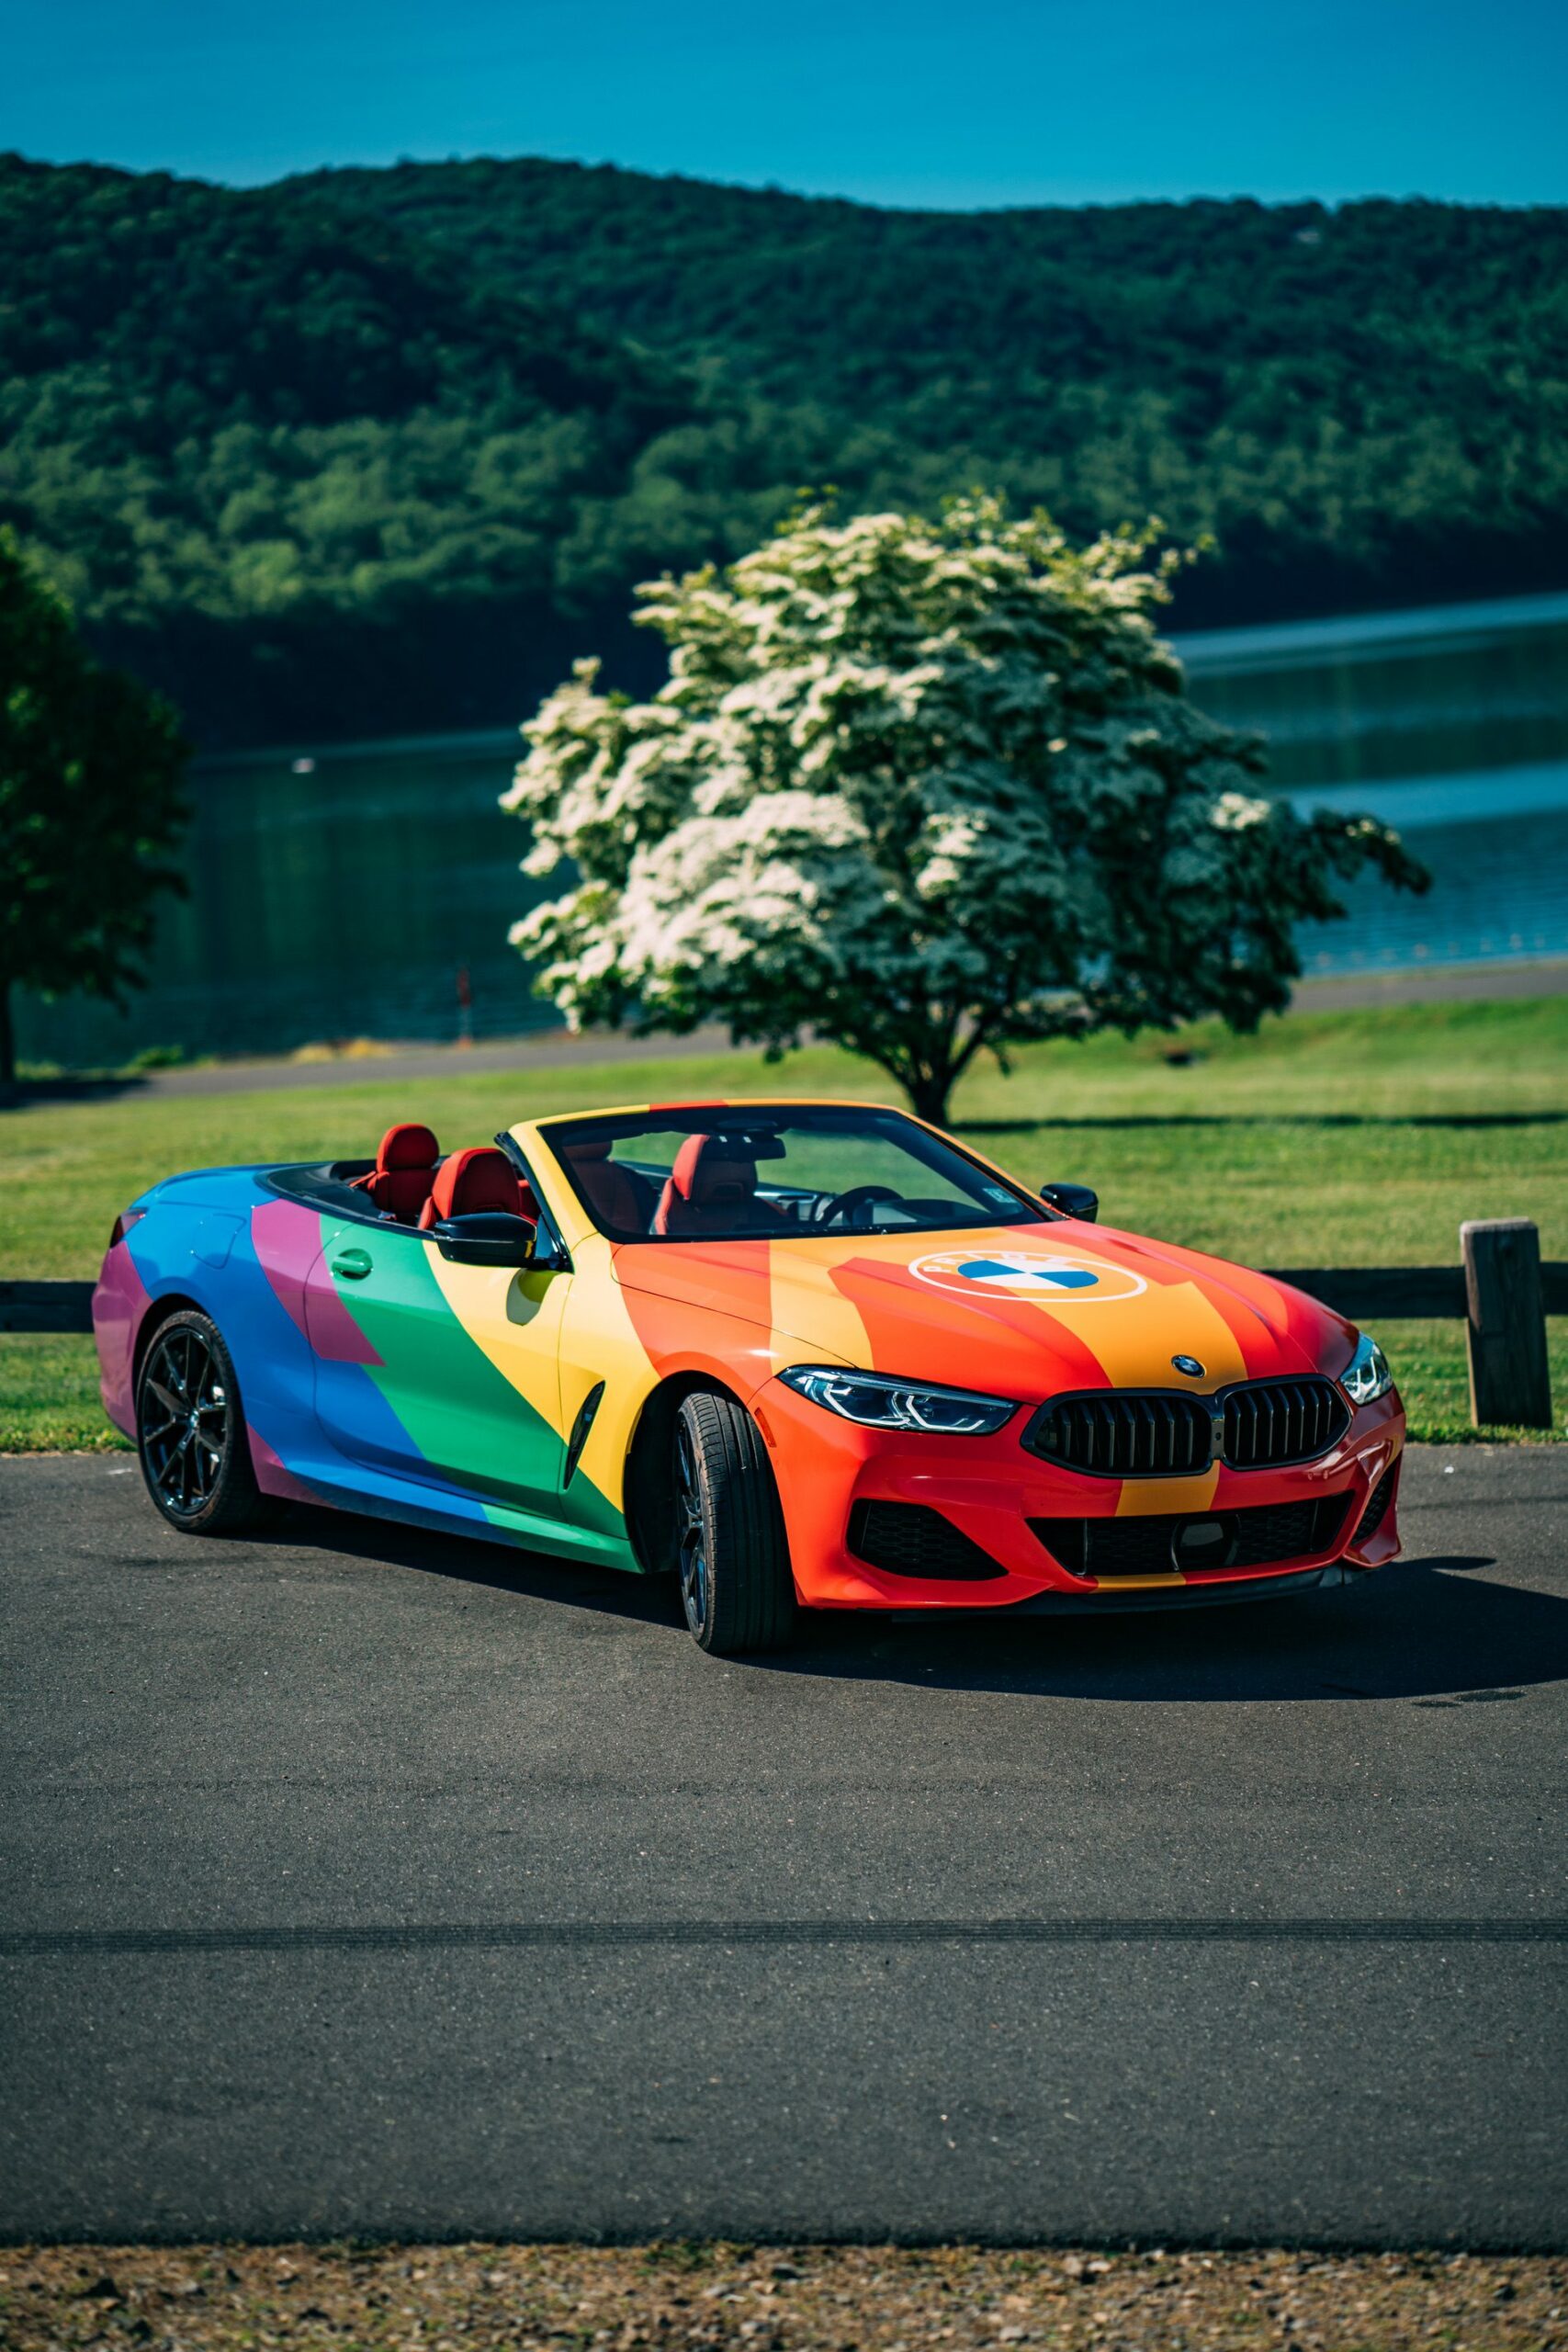 Driven by Pride BMW